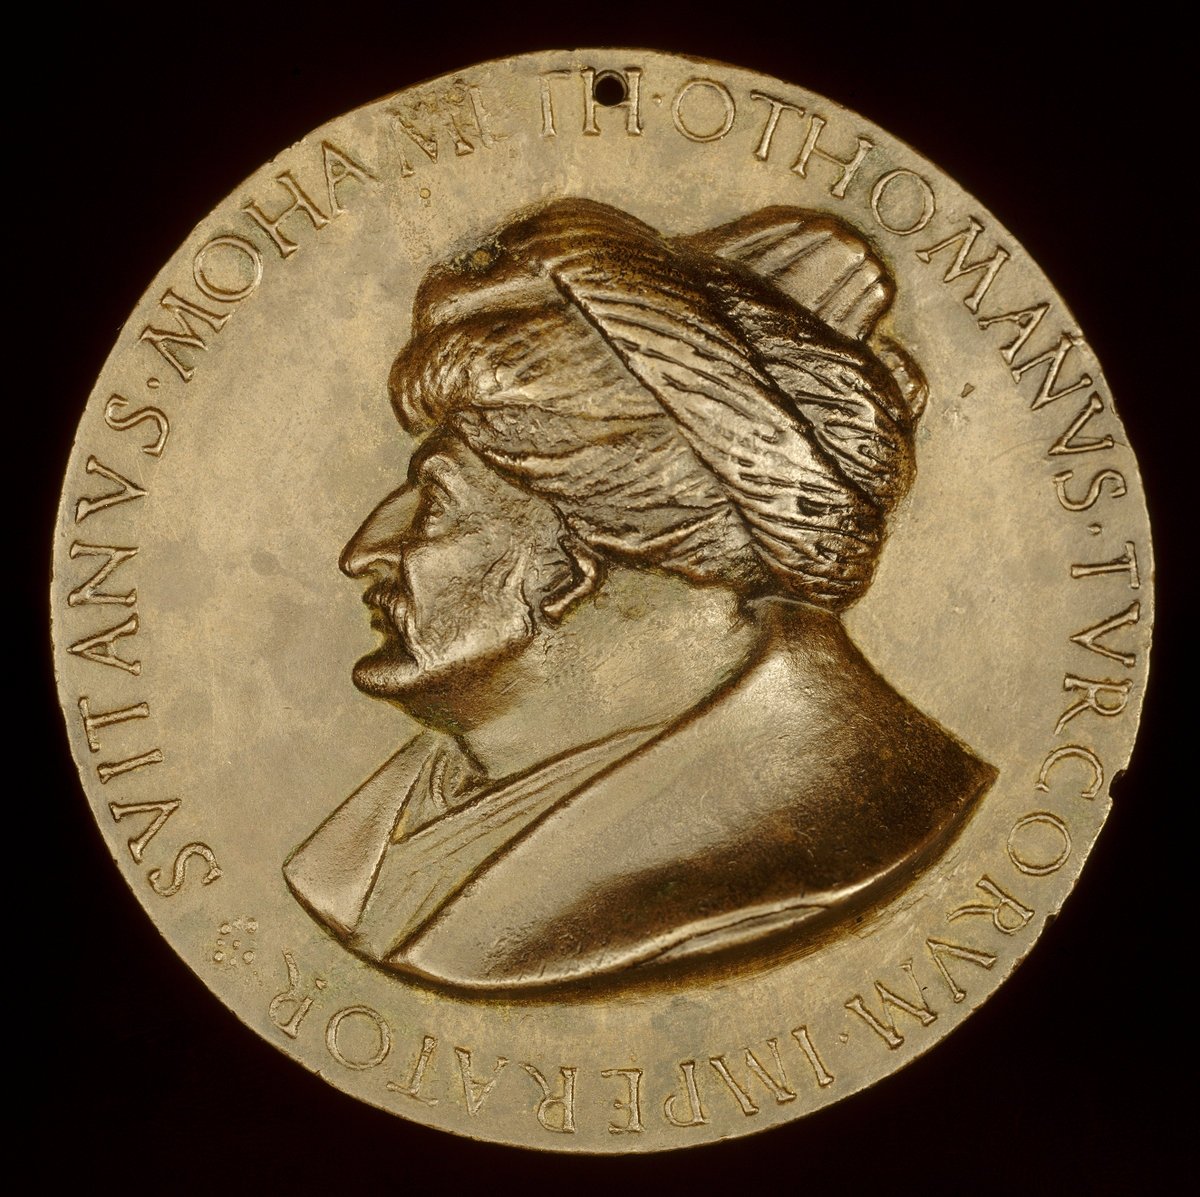 A European bronze medal from the period of Sultan Mehmed the Conqueror, 1481. 